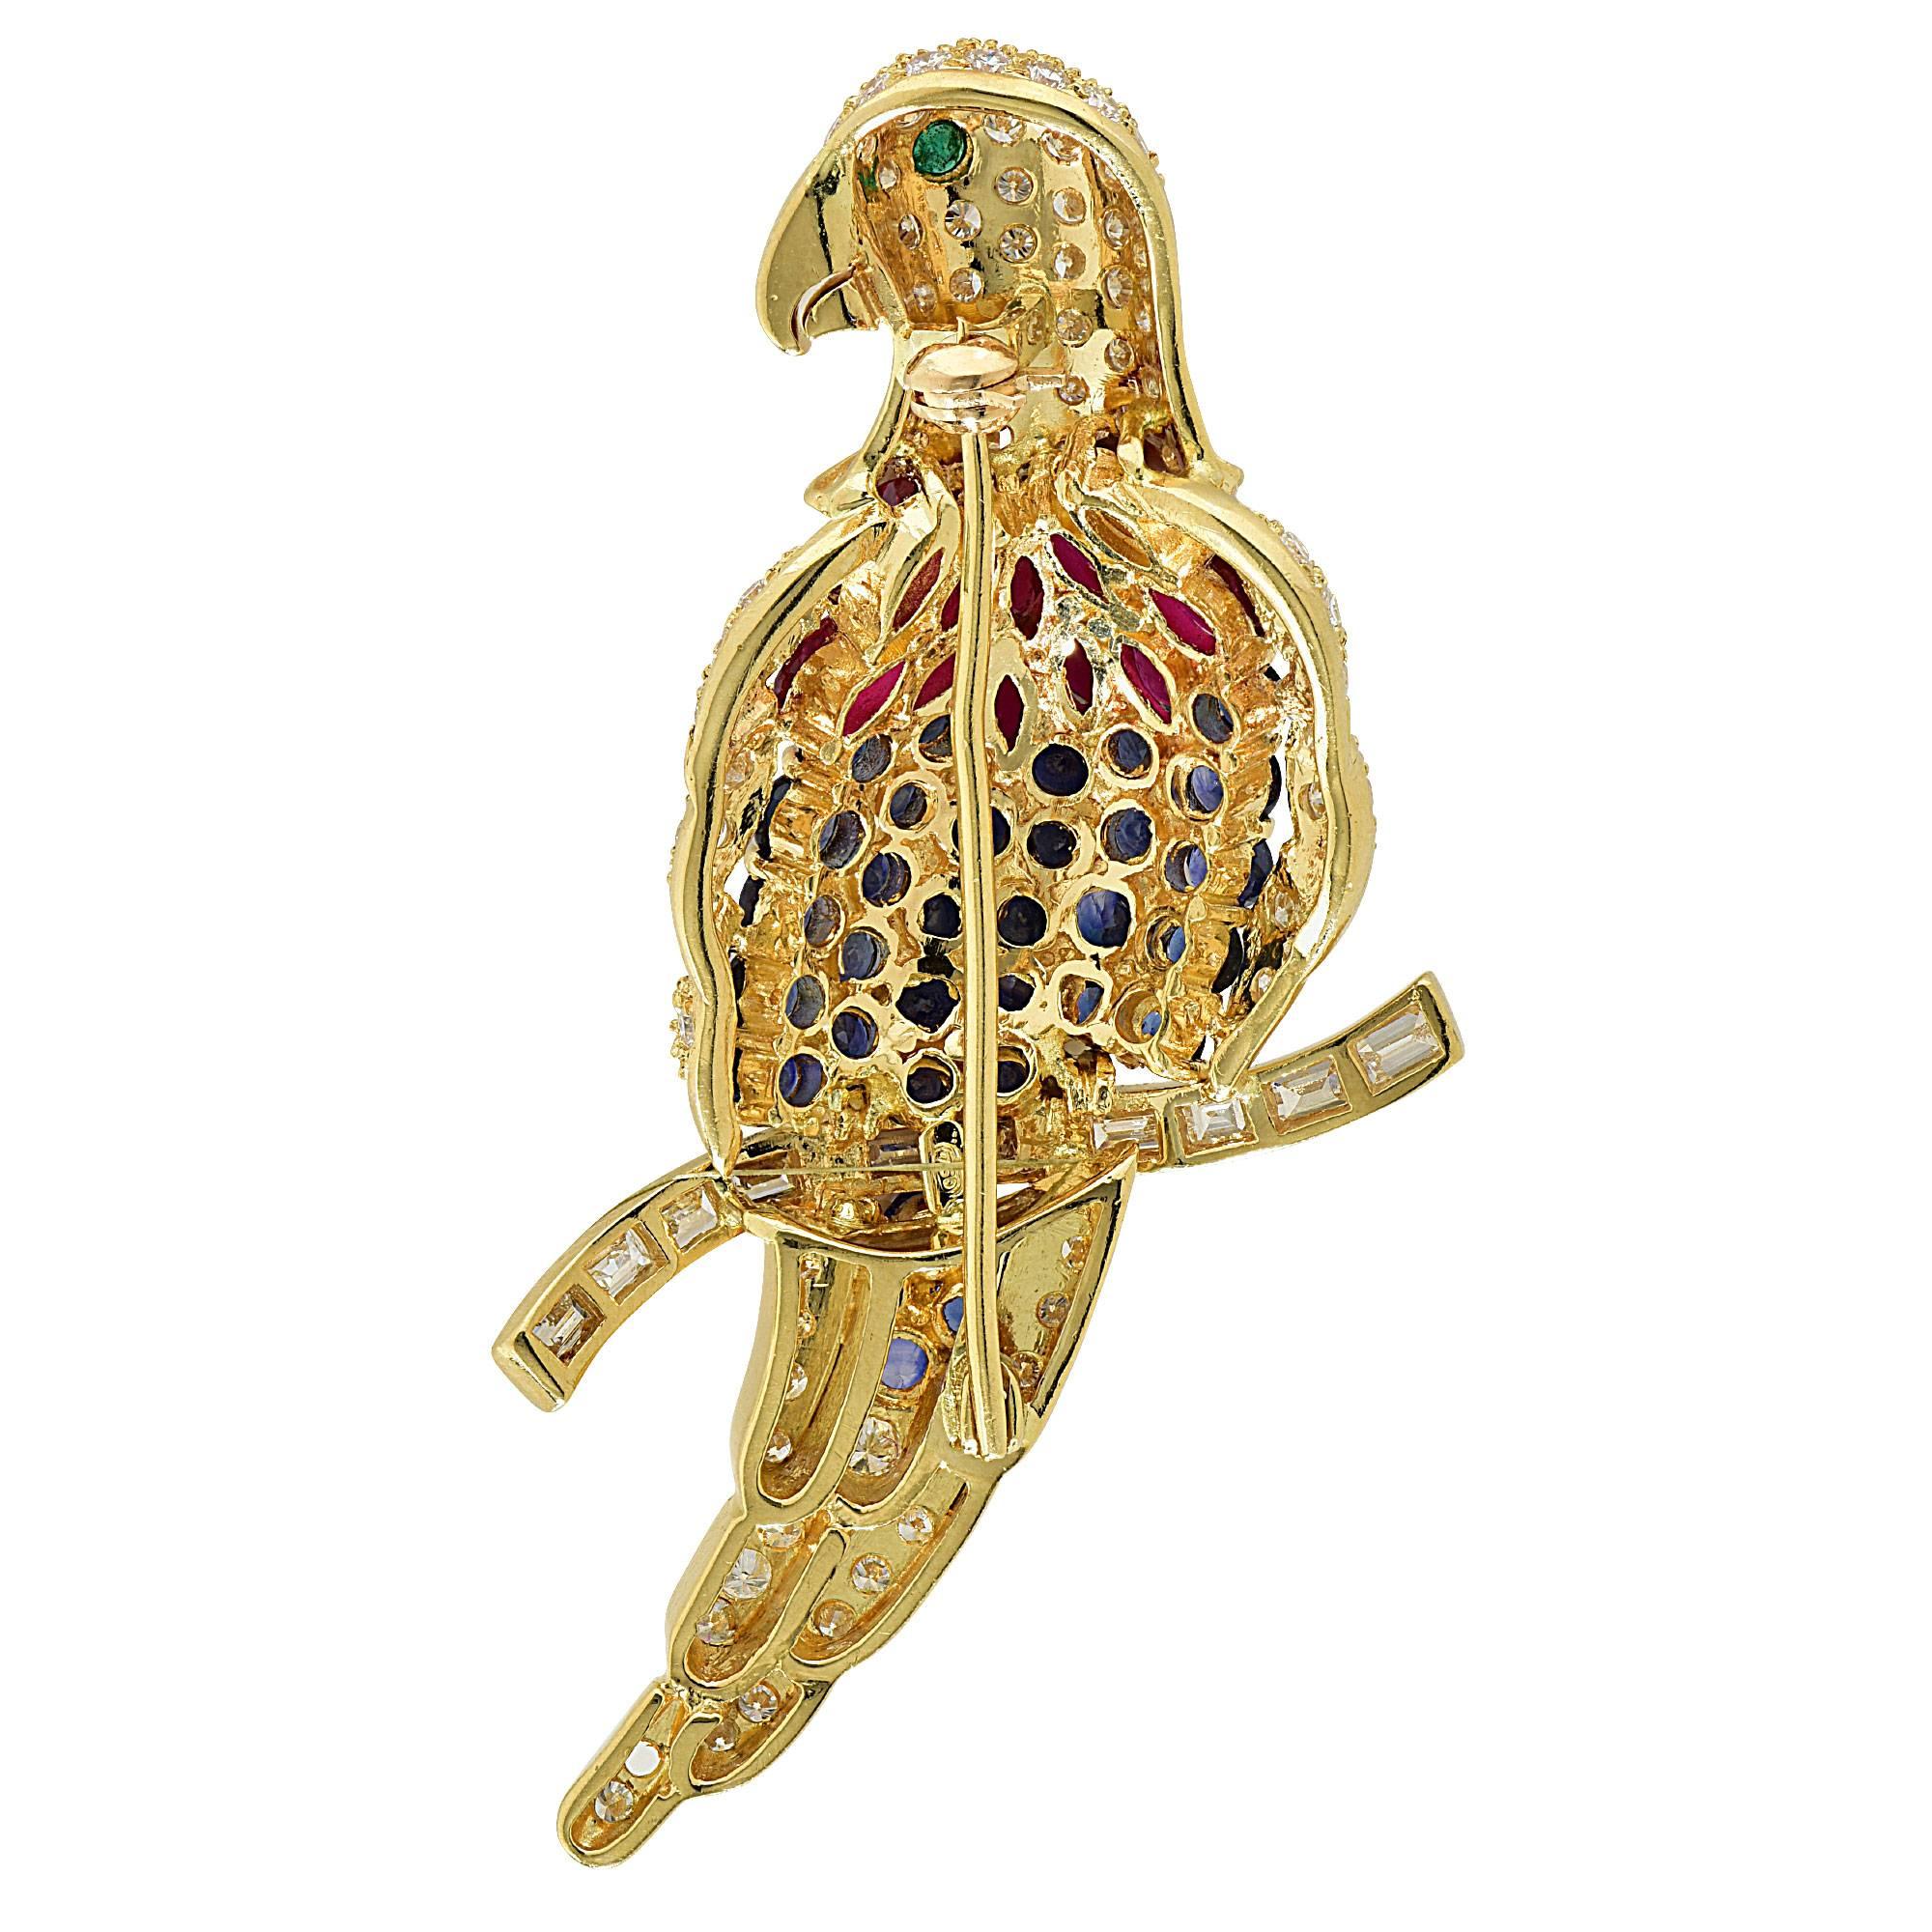 18k yellow gold bird brooch featuring 40 round and marquise cut sapphire and rubies weighing approximately 3.50cts total accented by approximately 3cts of round brilliant and baguette cut diamonds G color VS clarity.

Metal weight: 21.69